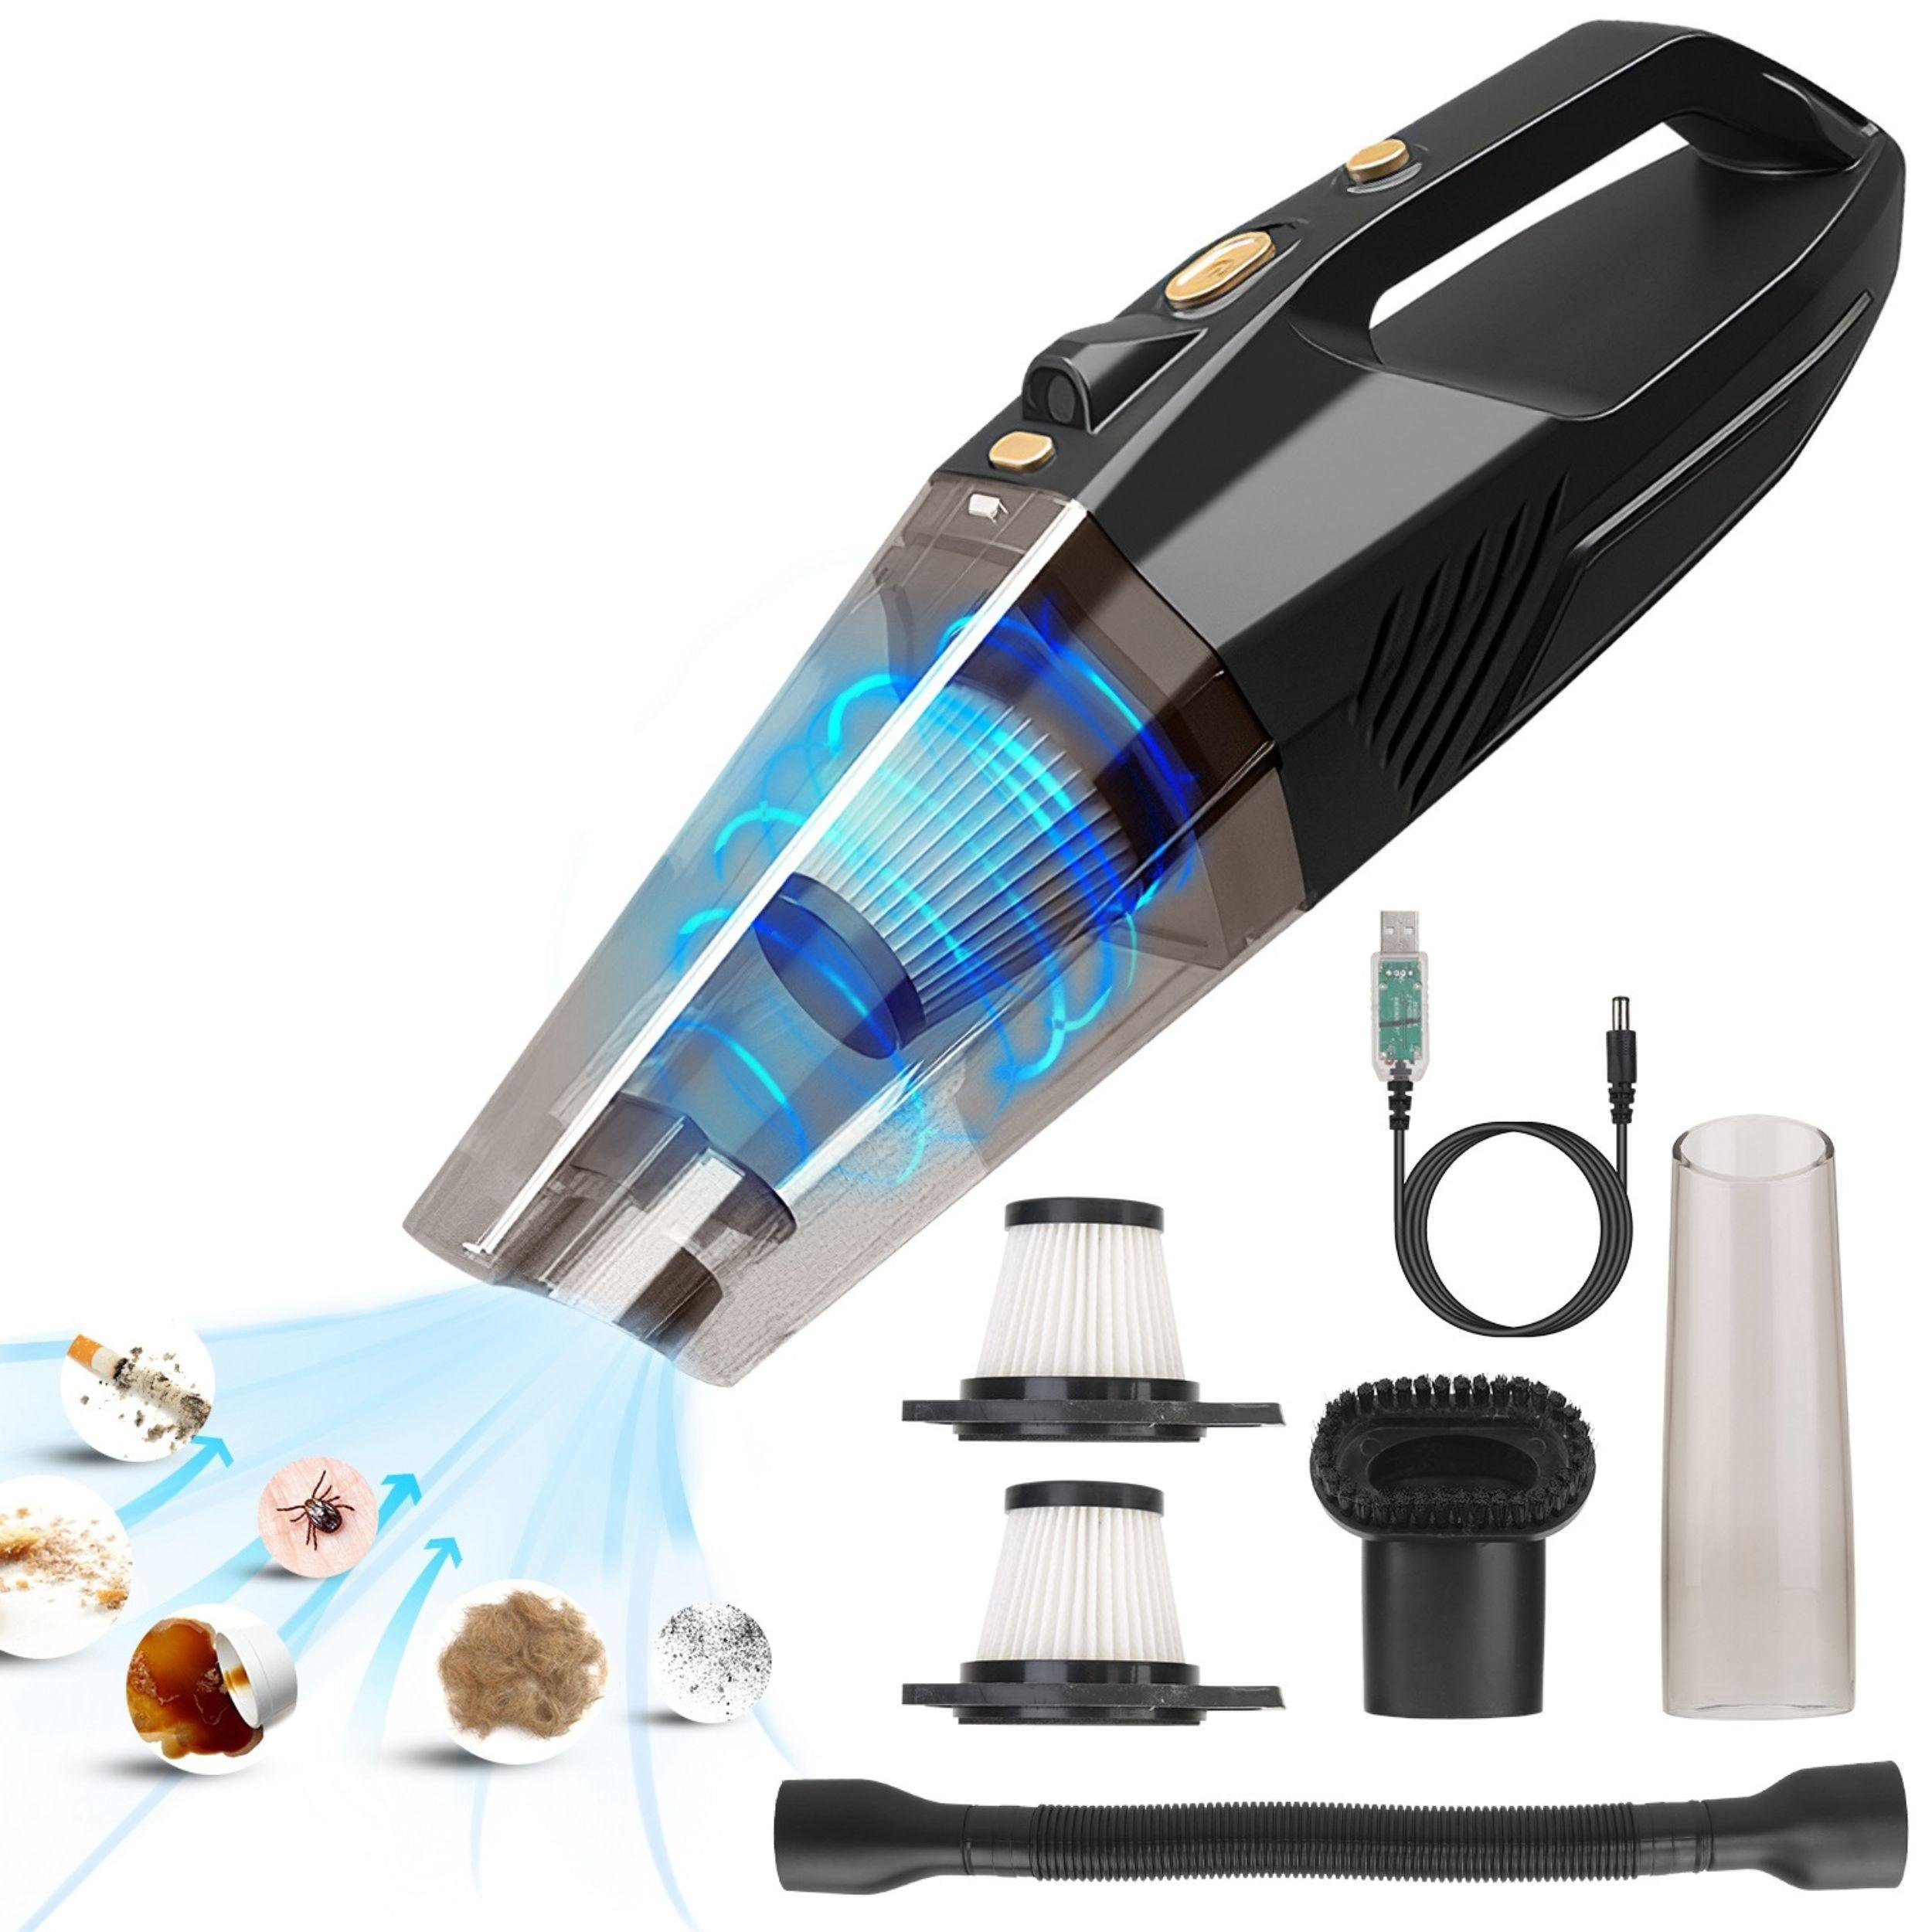 Fresh Fab Finds Black Powerful Handheld Car Vacuum Cleaner - 120W, 8000PA,  Cordless, Wet/Dry, Accessory Kit